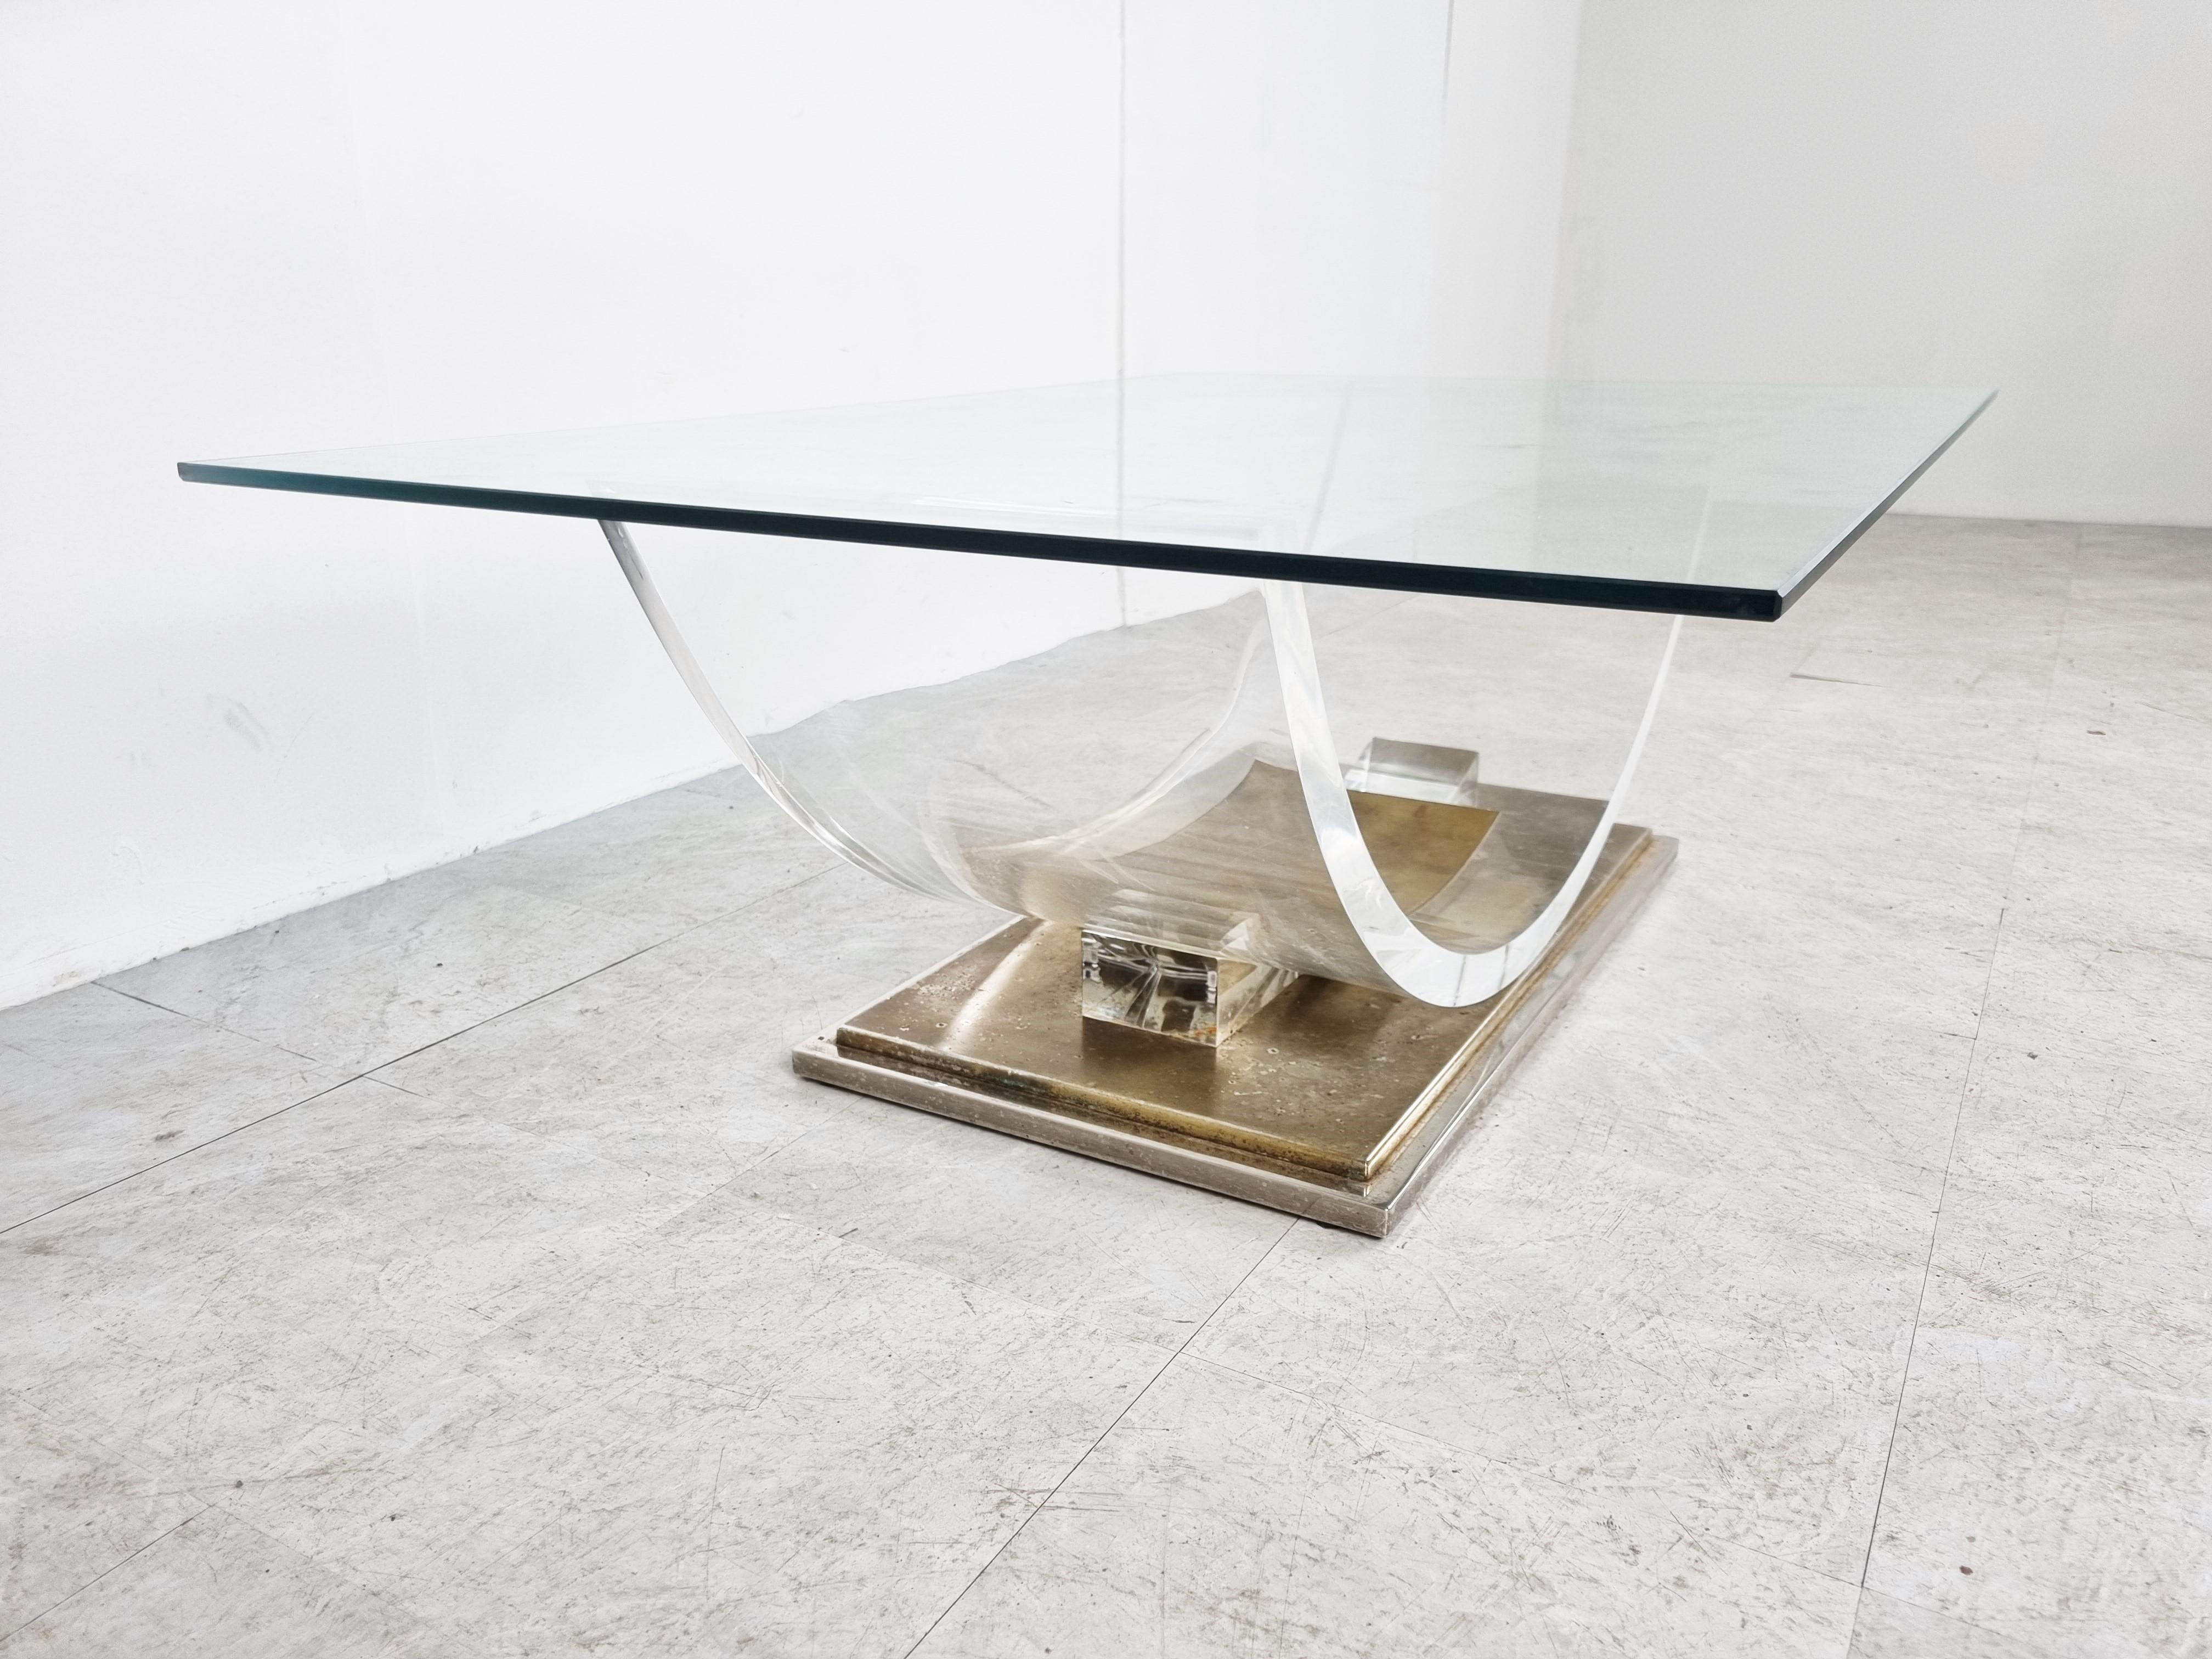 'arch' coffee table with a rectangular glass top in the by Charles Hollis Jonis and made by Belgochrom.

Made from a lucite frame mounted on a heavy brass base.

Patina on the brass.

1970s - Belgium

Dimensions:
Height: 40cm/15.74